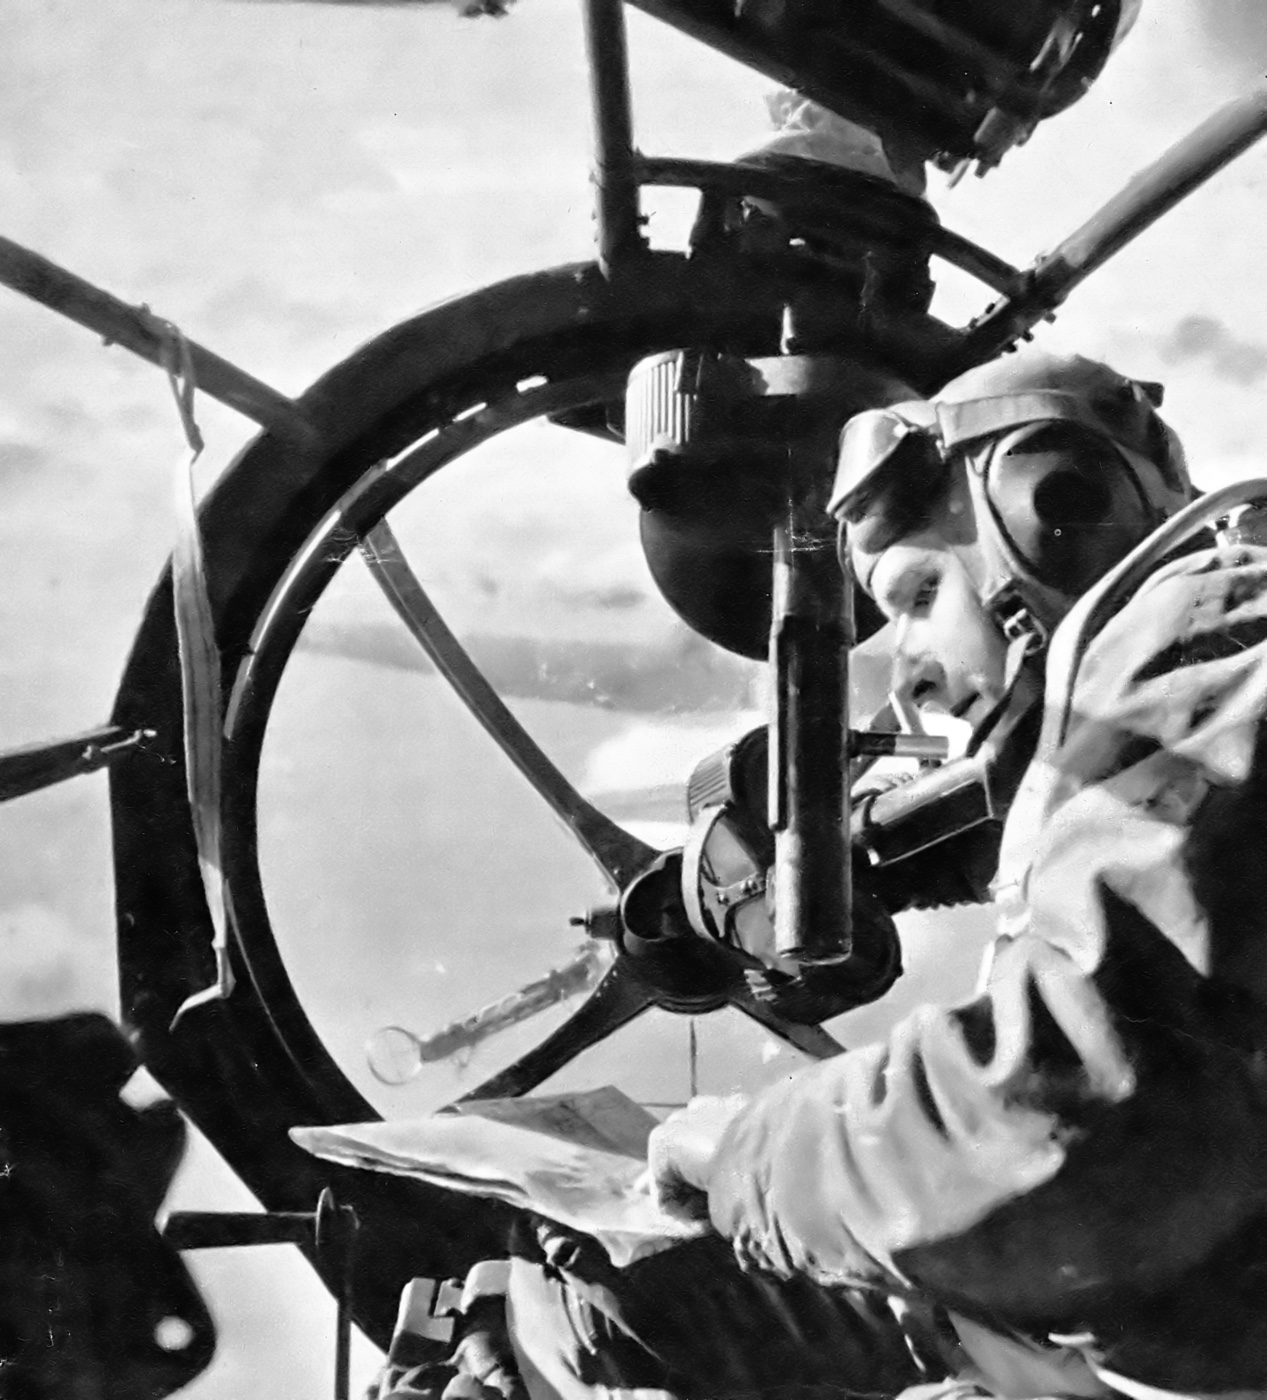 In this photo, we see a late-war model He111 with additional machine guns in the nose gunner position.